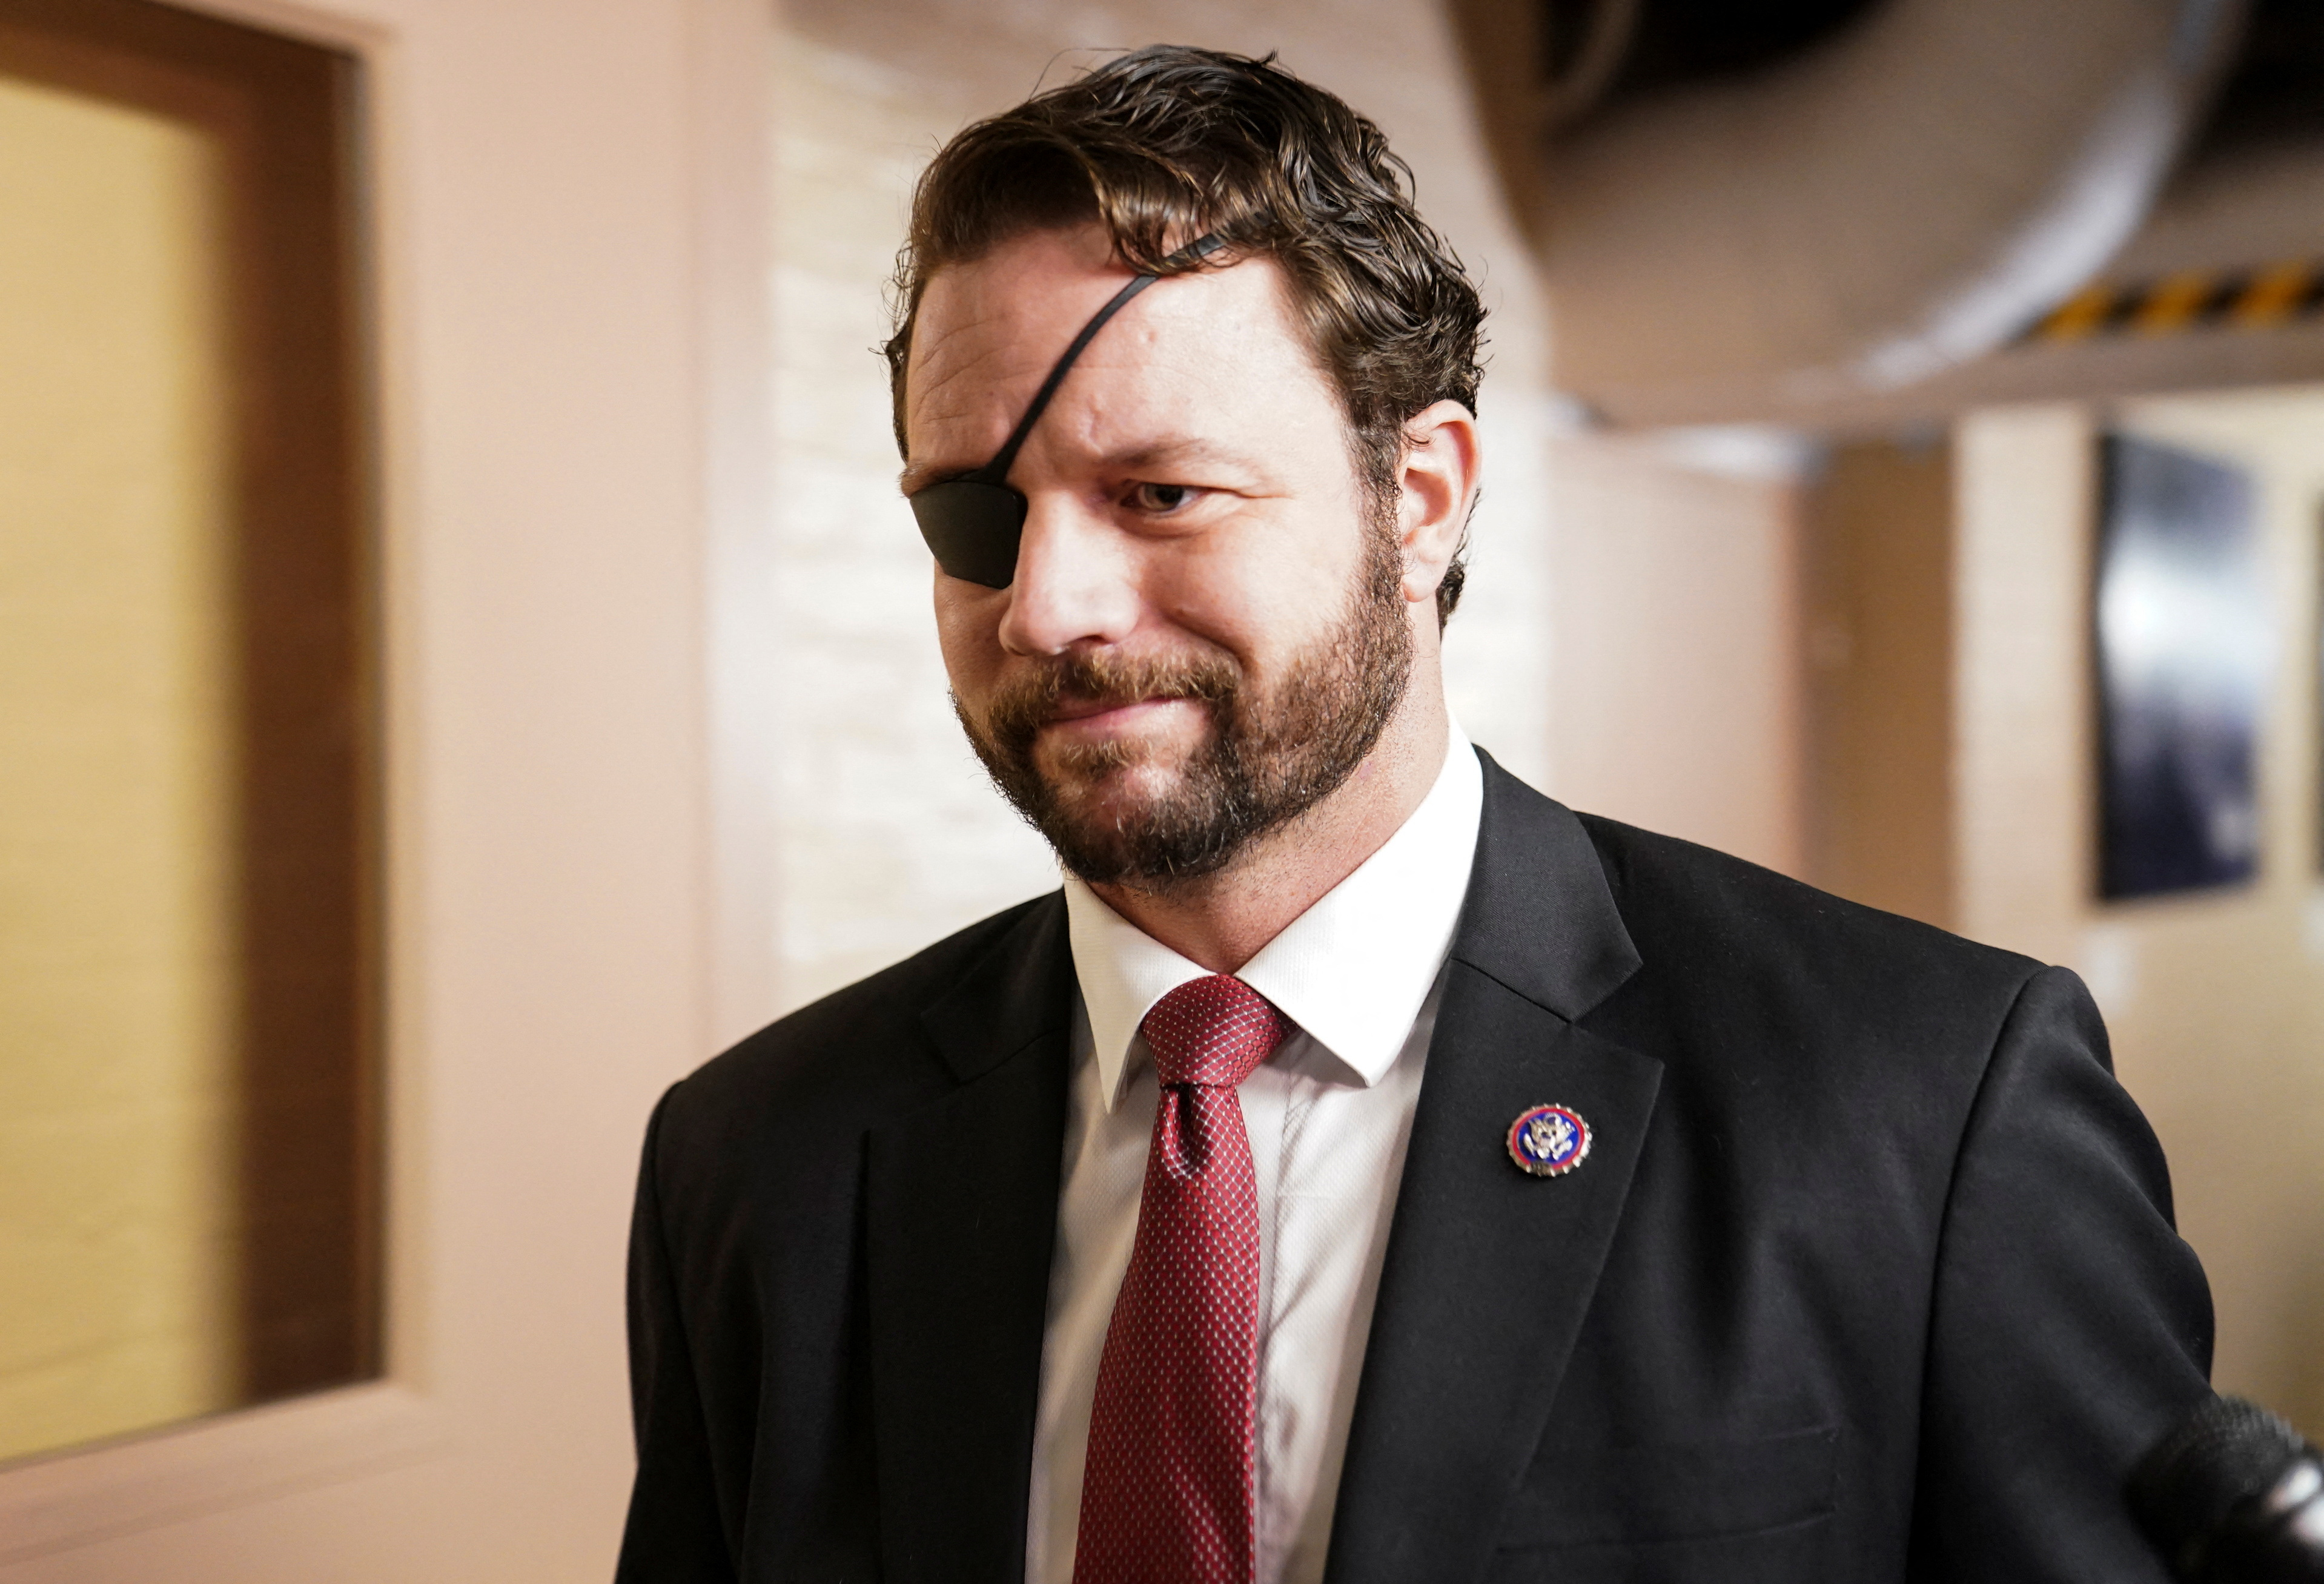 U.S. Rep. Dan Crenshaw (R-TX) walks to a House GOP Caucus meeting at the U.S. Capitol on the first day of the new Congress in Washington, U.S., January 3, 2023. REUTERS/Jon Cherry